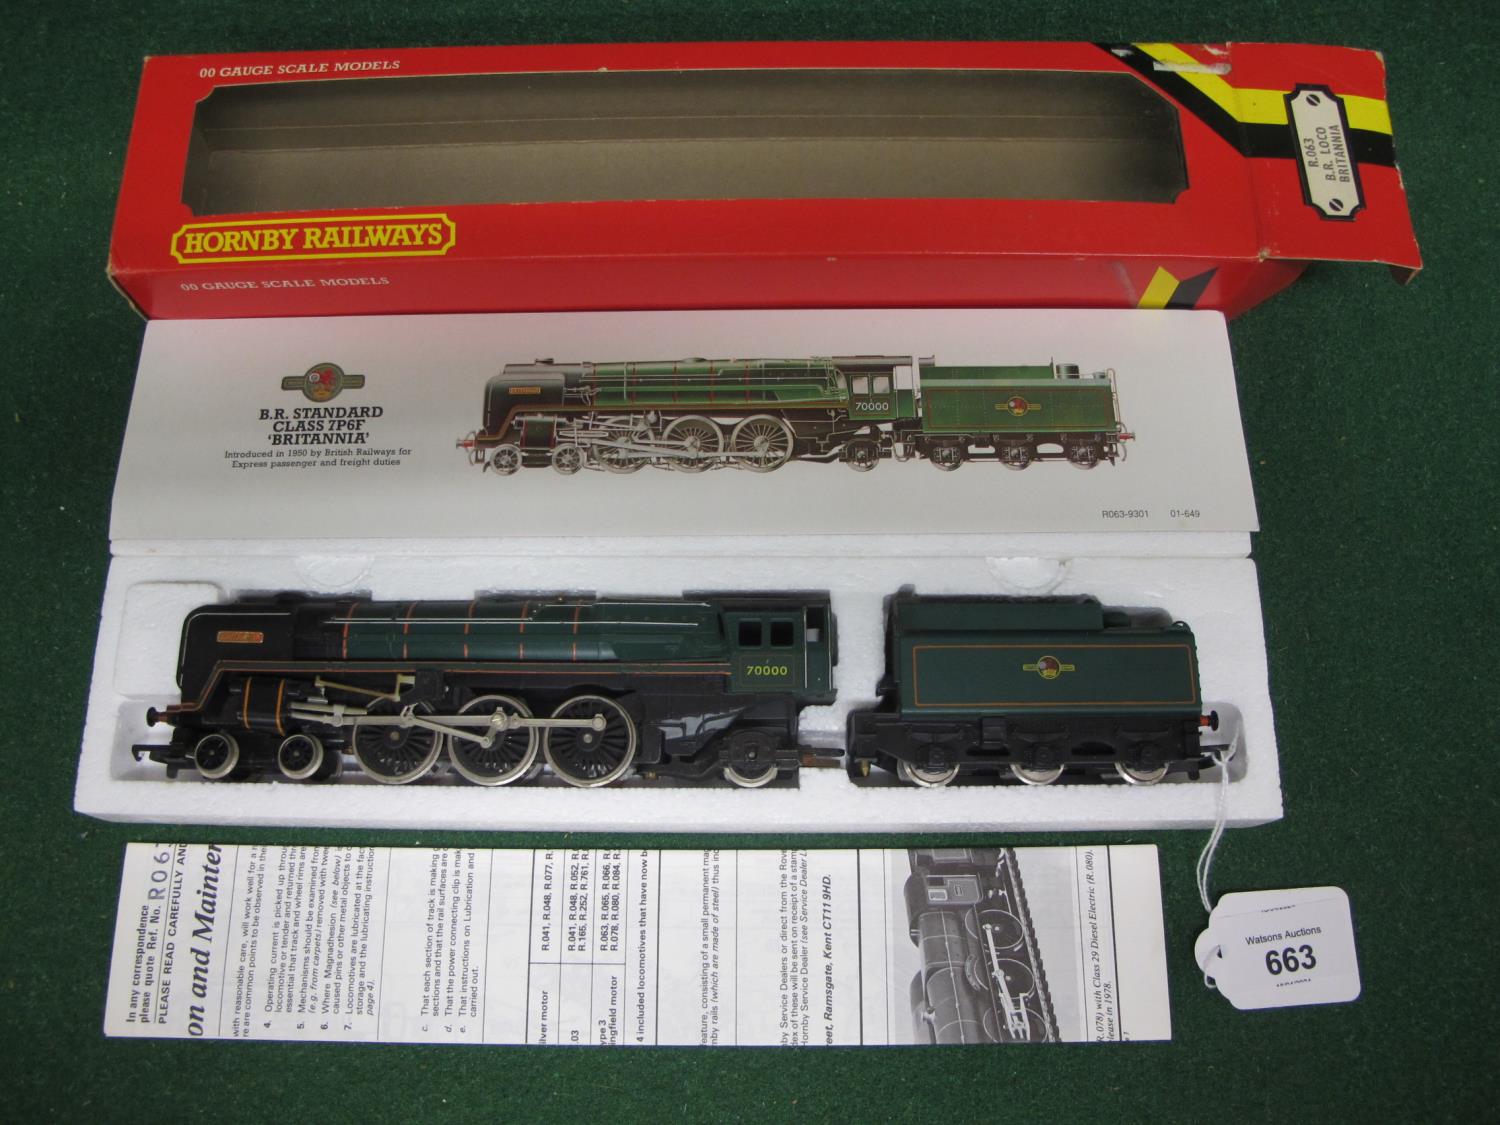 1978 Hornby OO scale R063 STD 7MT 4-6-2 locomotive and tender No. 70000 Britannia in late BR lined